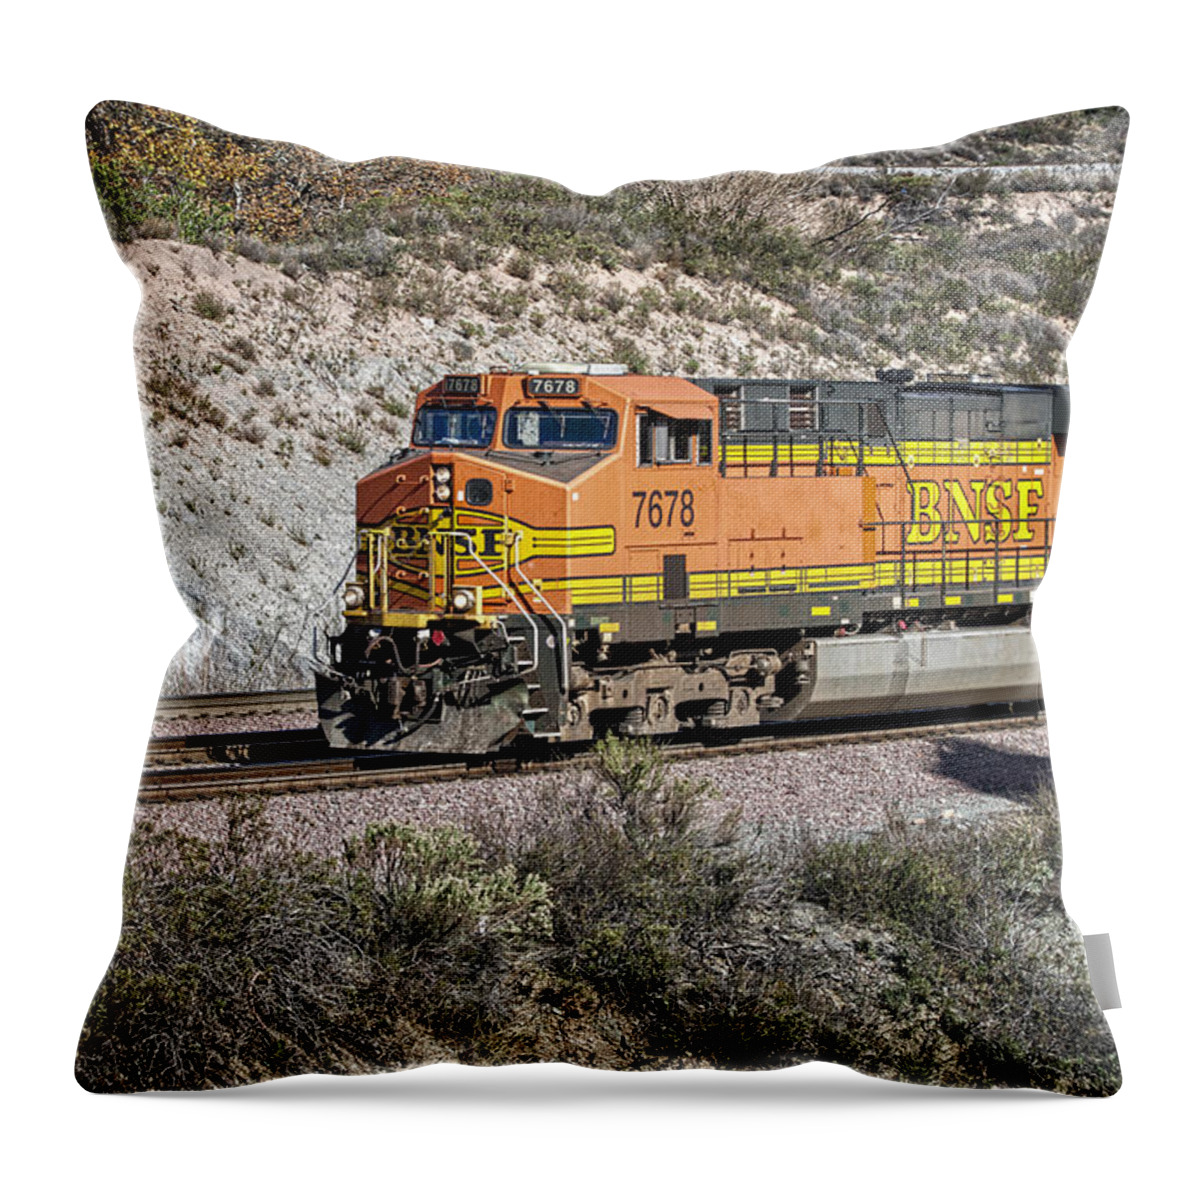 Bnsf Throw Pillow featuring the photograph Bn 7678 by Jim Thompson